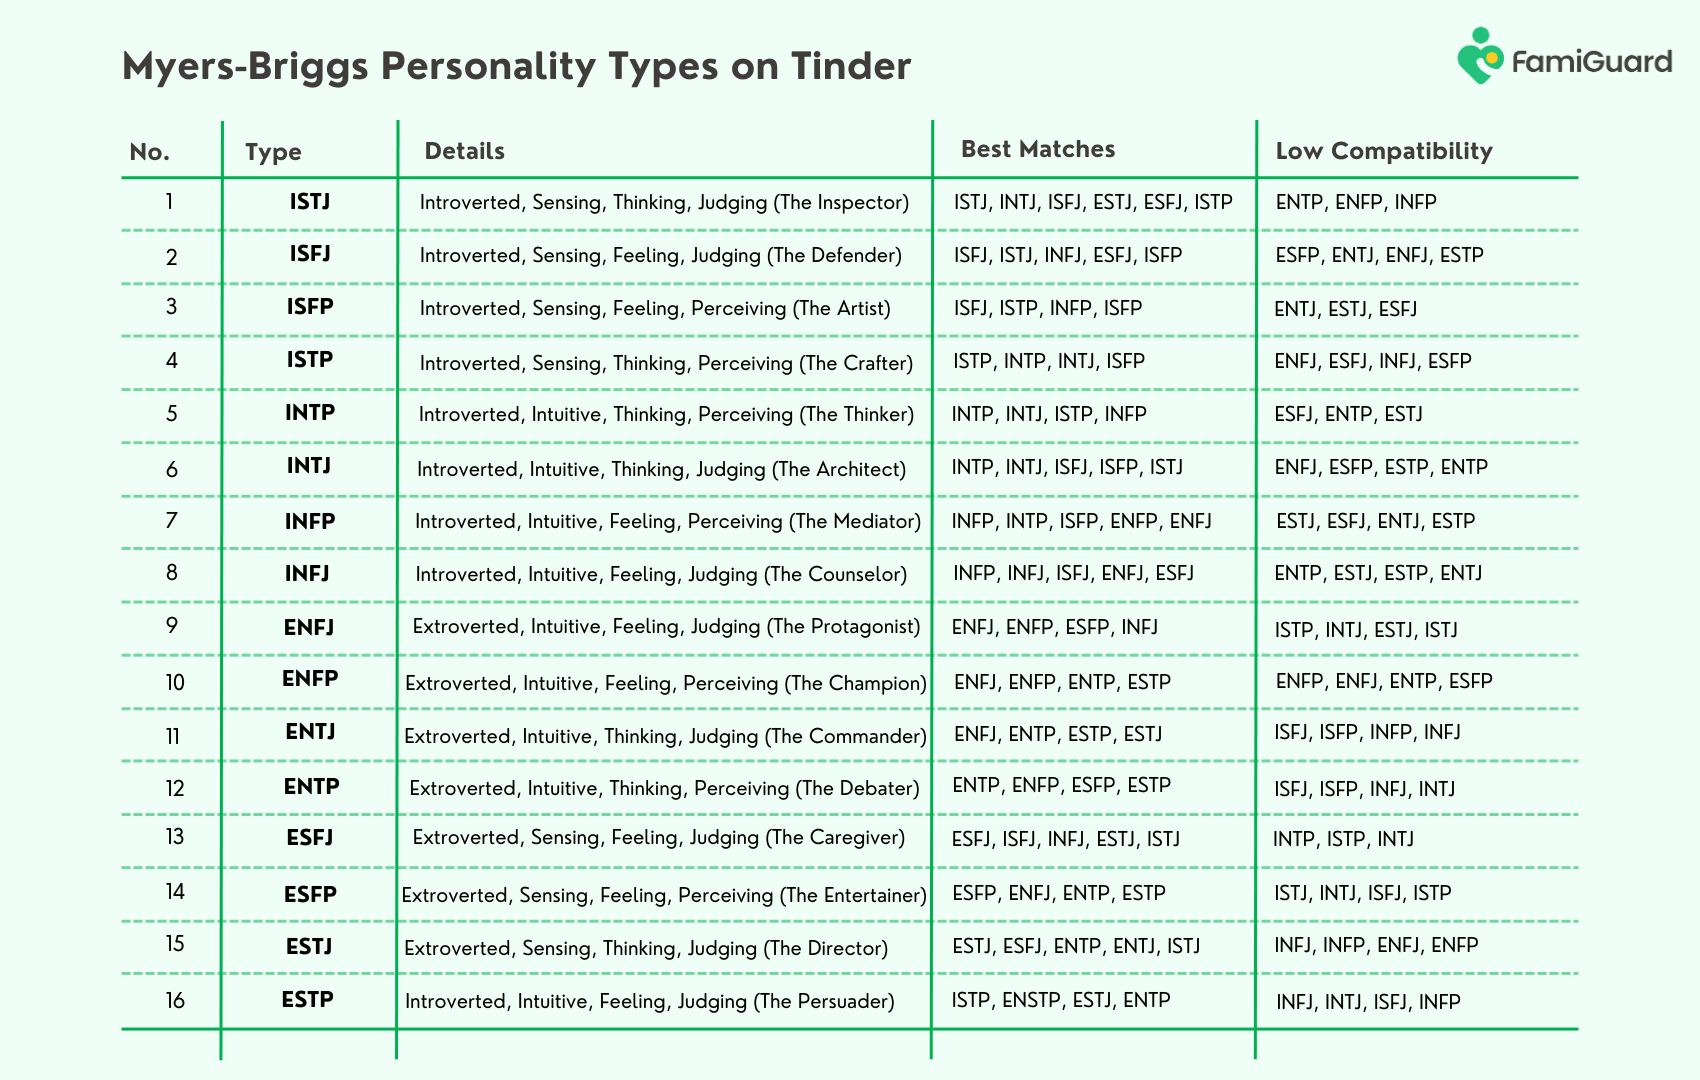 Myers-Briggs Personality Types on Tinder